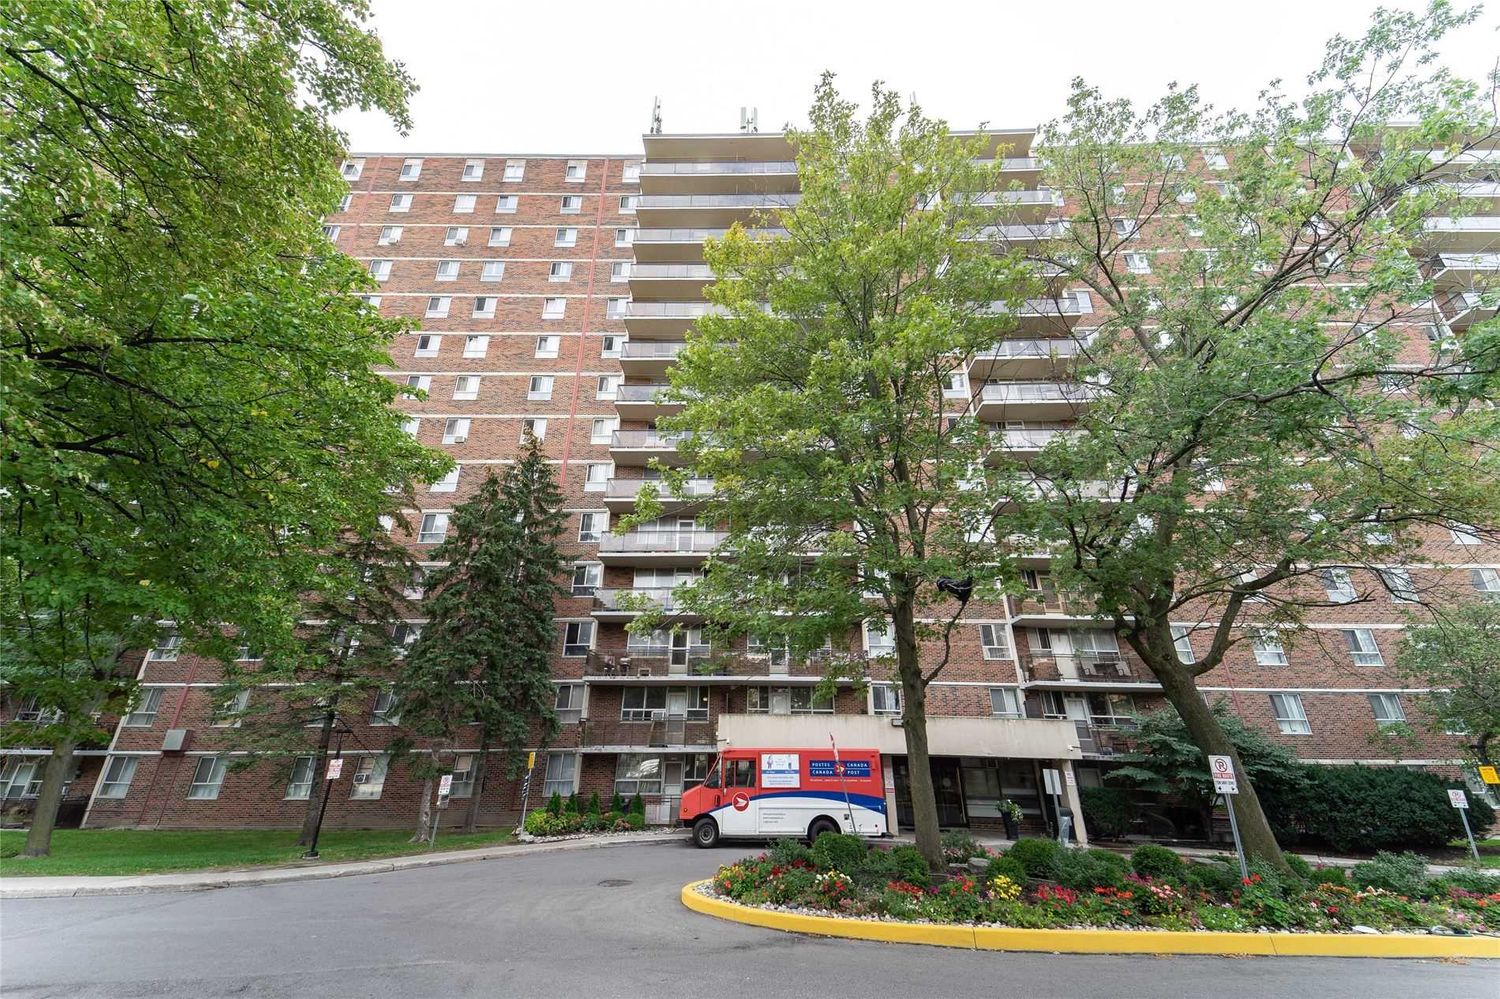 1950 Kennedy Road. Dorset Towers Condos is located in  Scarborough, Toronto - image #1 of 3